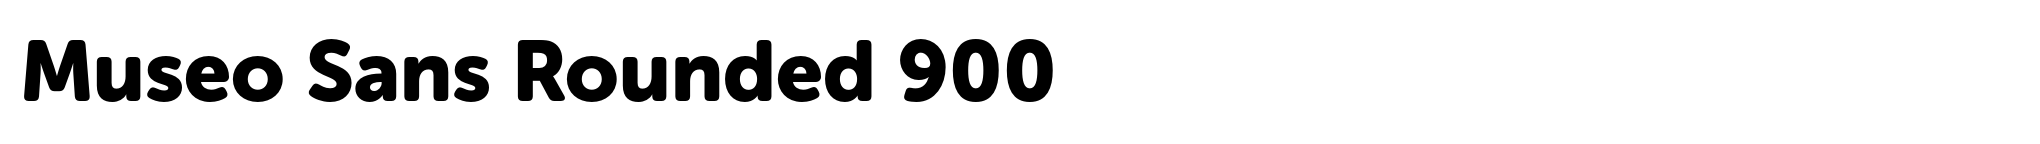 Museo Sans Rounded 900 image